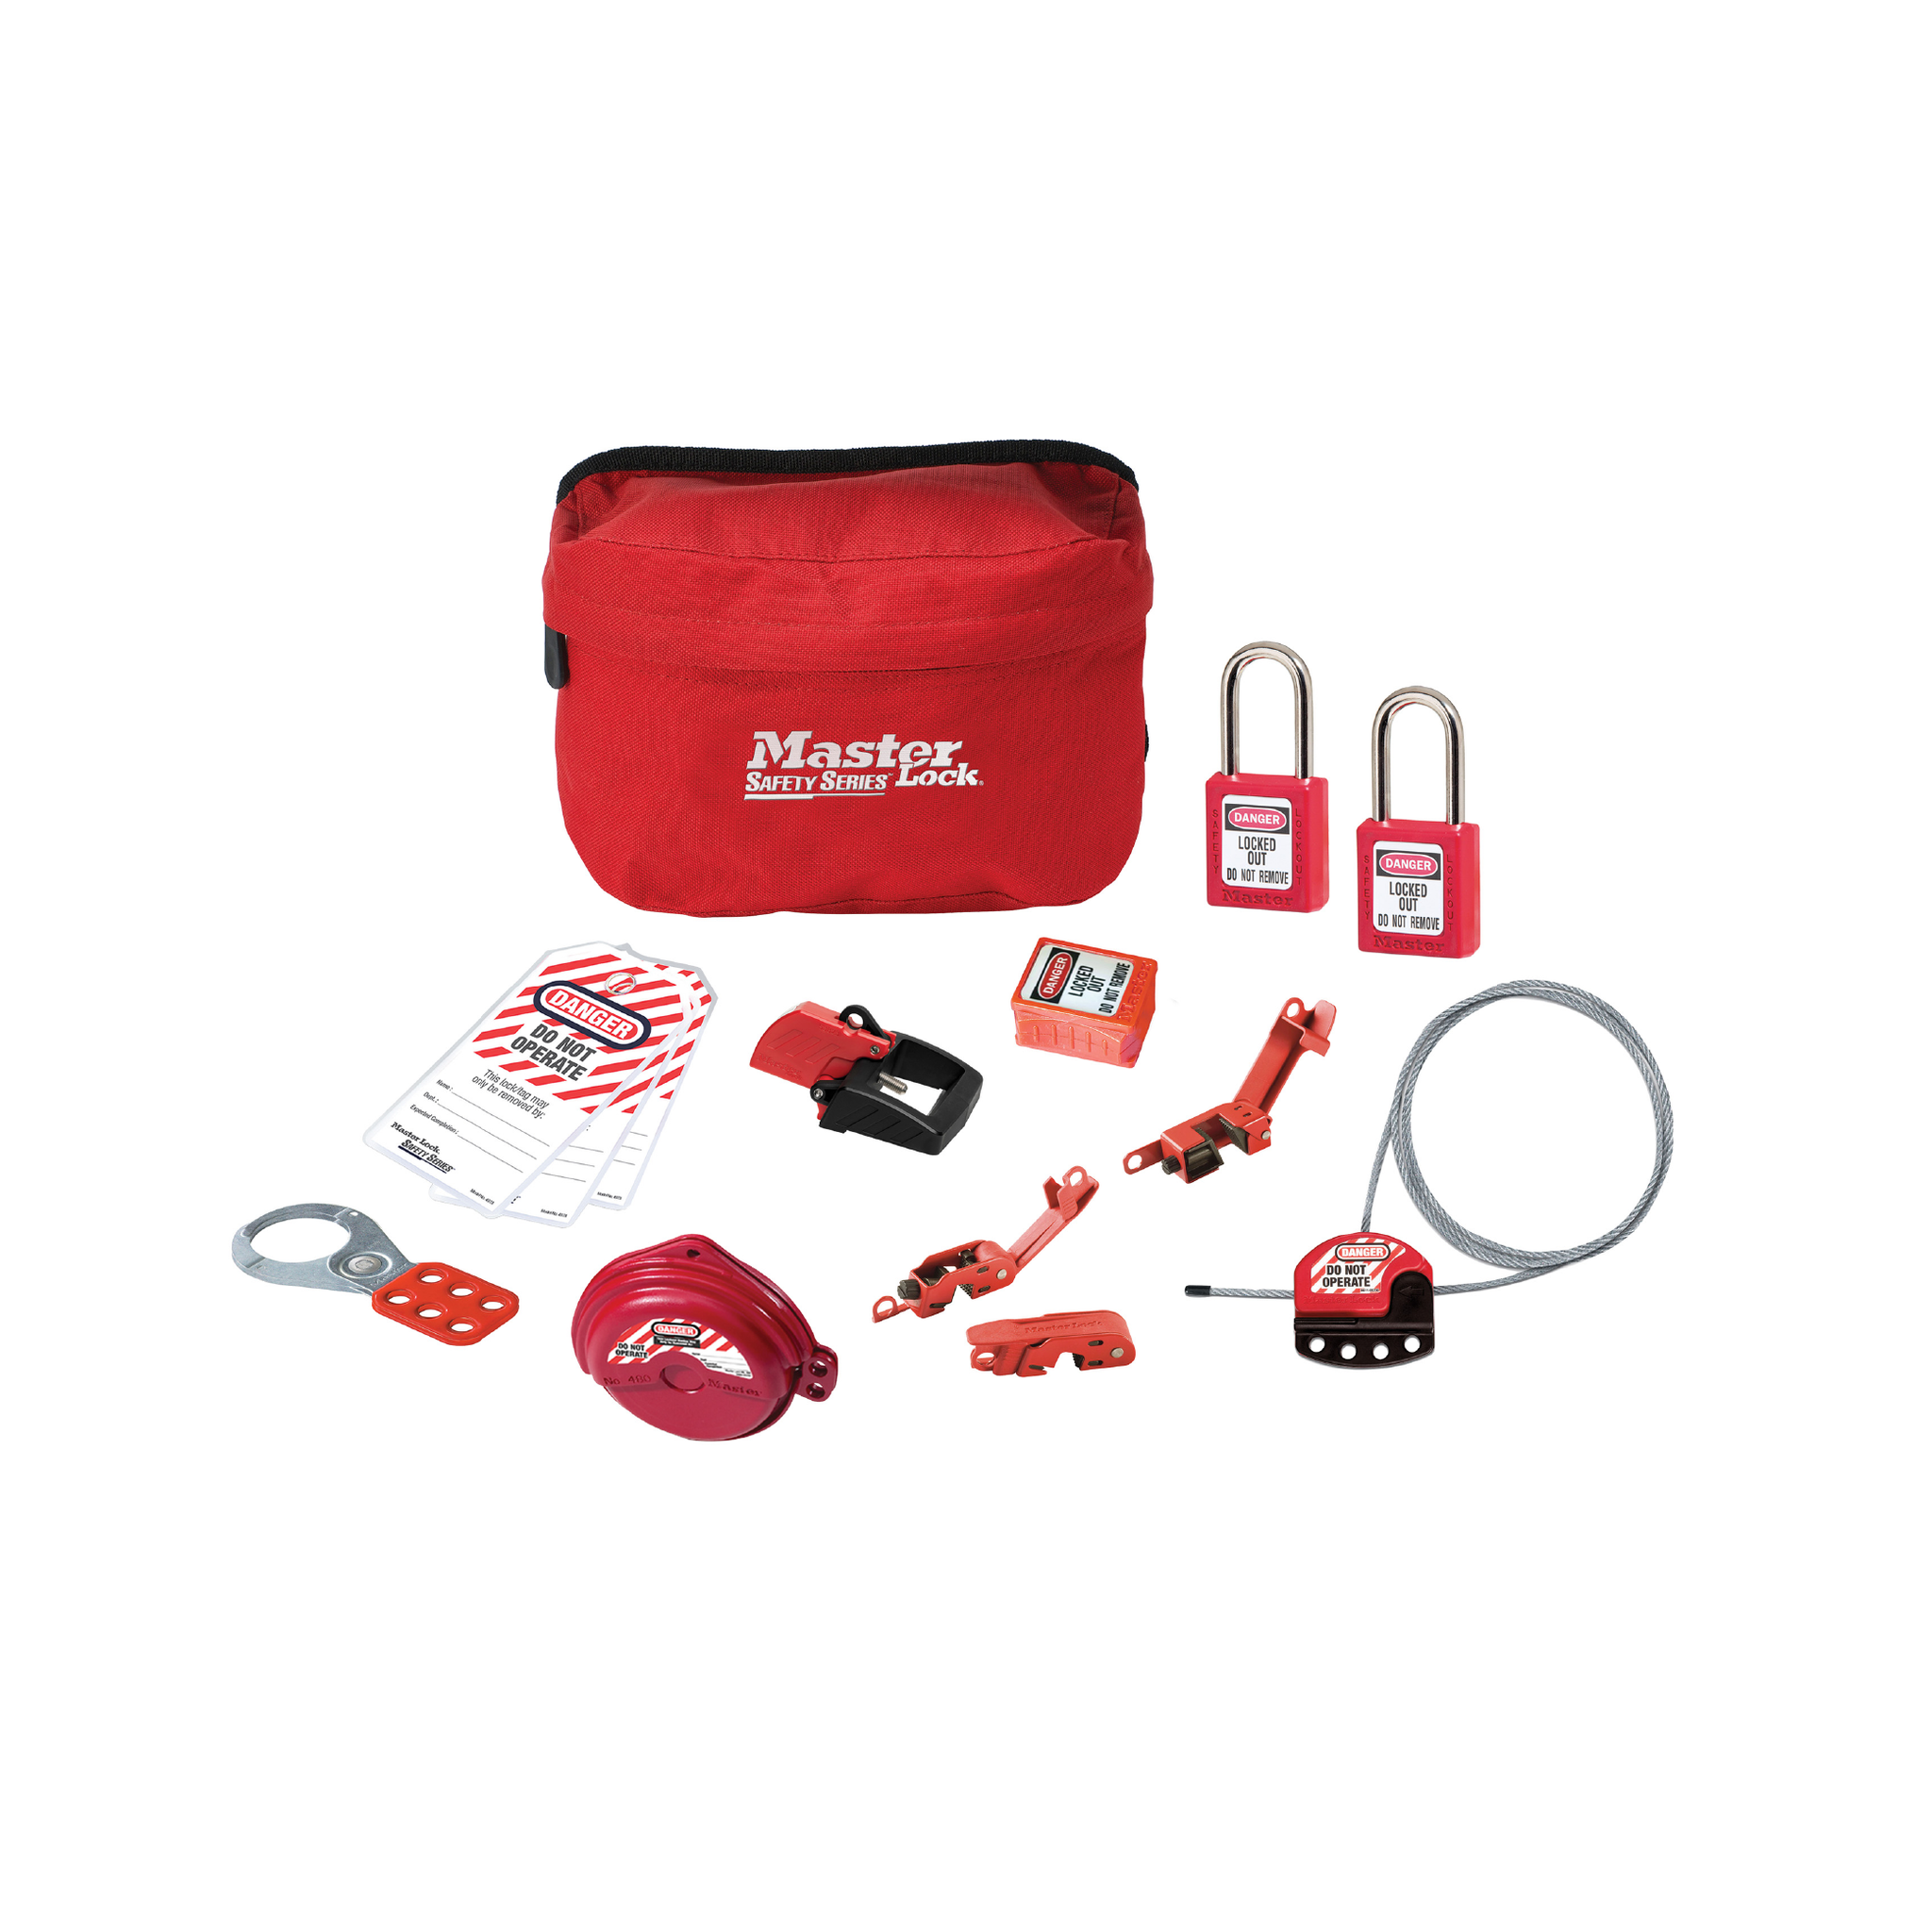 Master Lock Tool boxes S1017-S1020-S1023 - lockout-tagout-shop